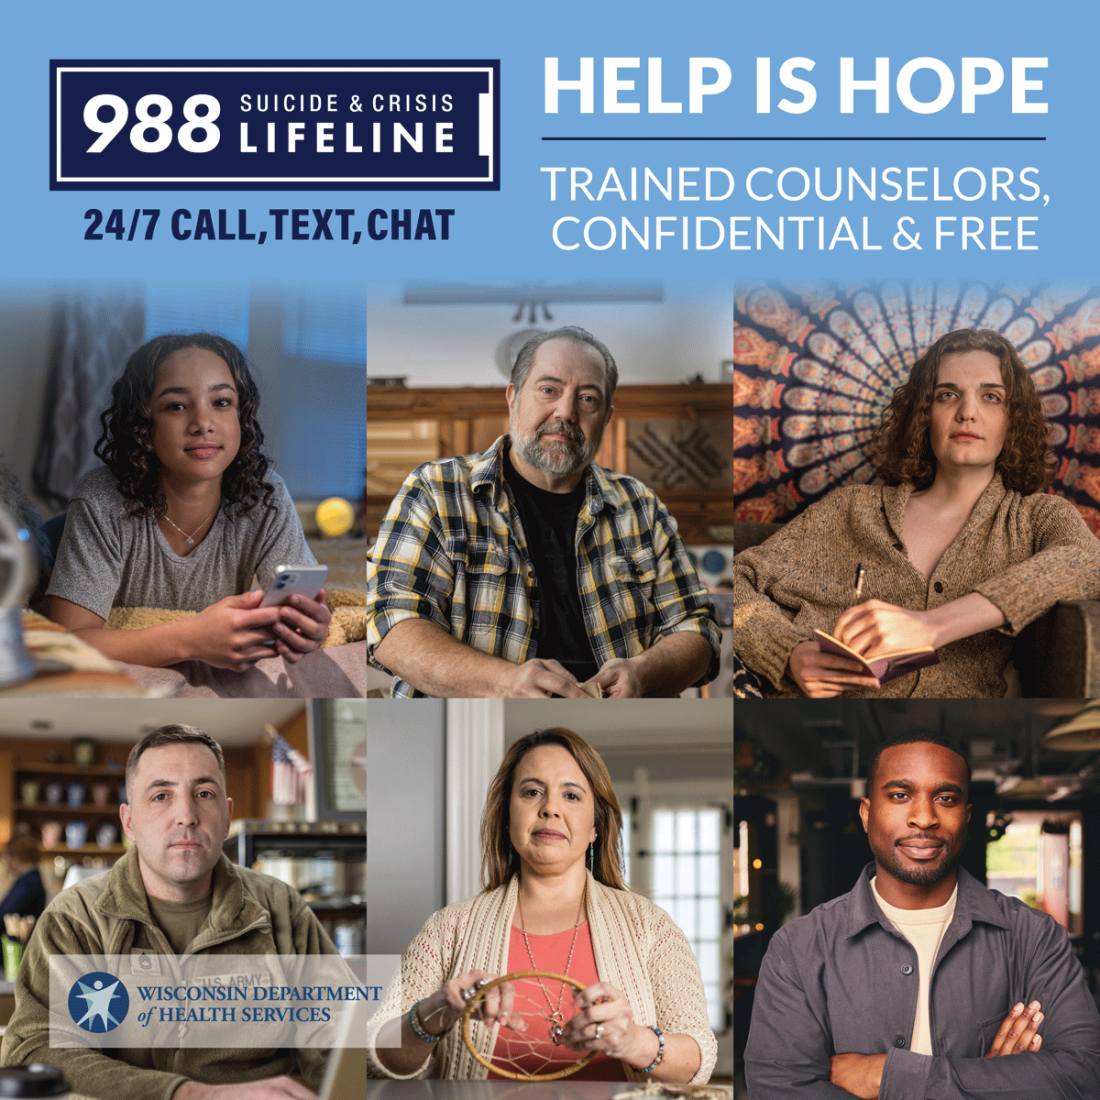 Collage of people - Help is hope - 988 Suicide & Crisis Lifeline 24/7 Call, Text, Chat